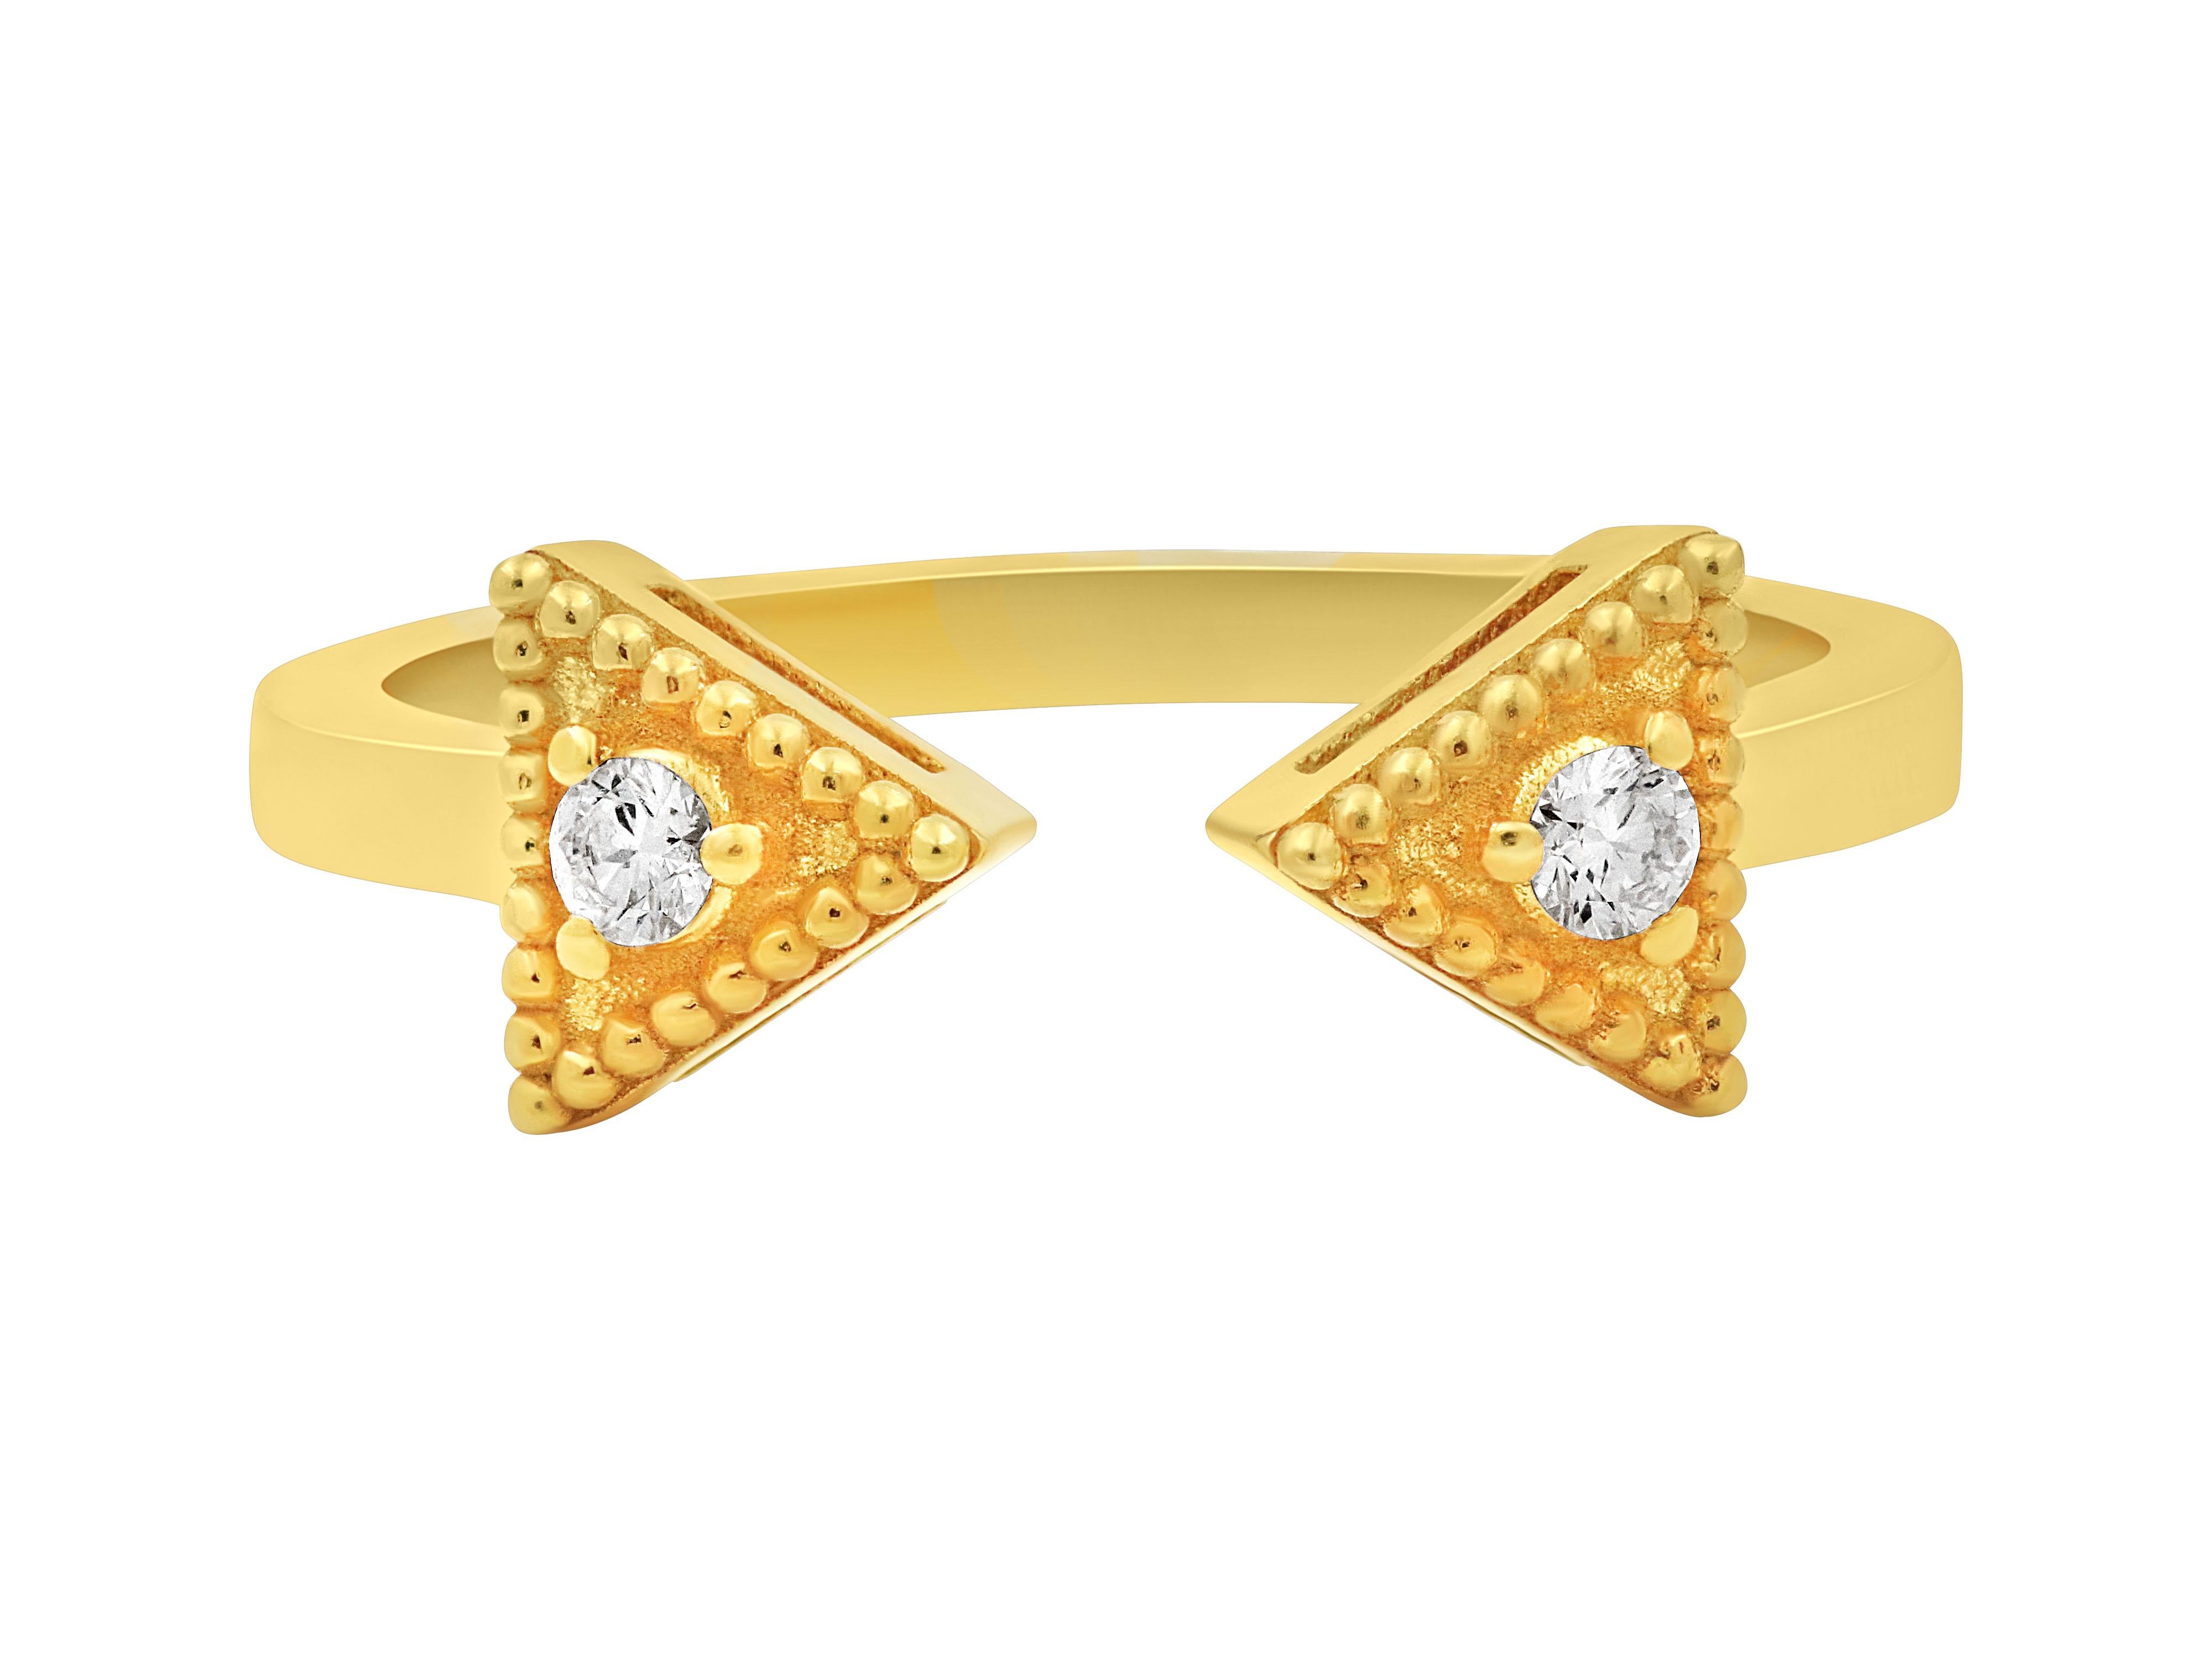 Granulated neoclassic ring in 18k gold with 0.08 carats brilliant  cut diamonds that combines classical aesthetics with modern techniques. The neoclassic design of the ring takes inspiration from Ancient Greek art, characterized by its clean lines,